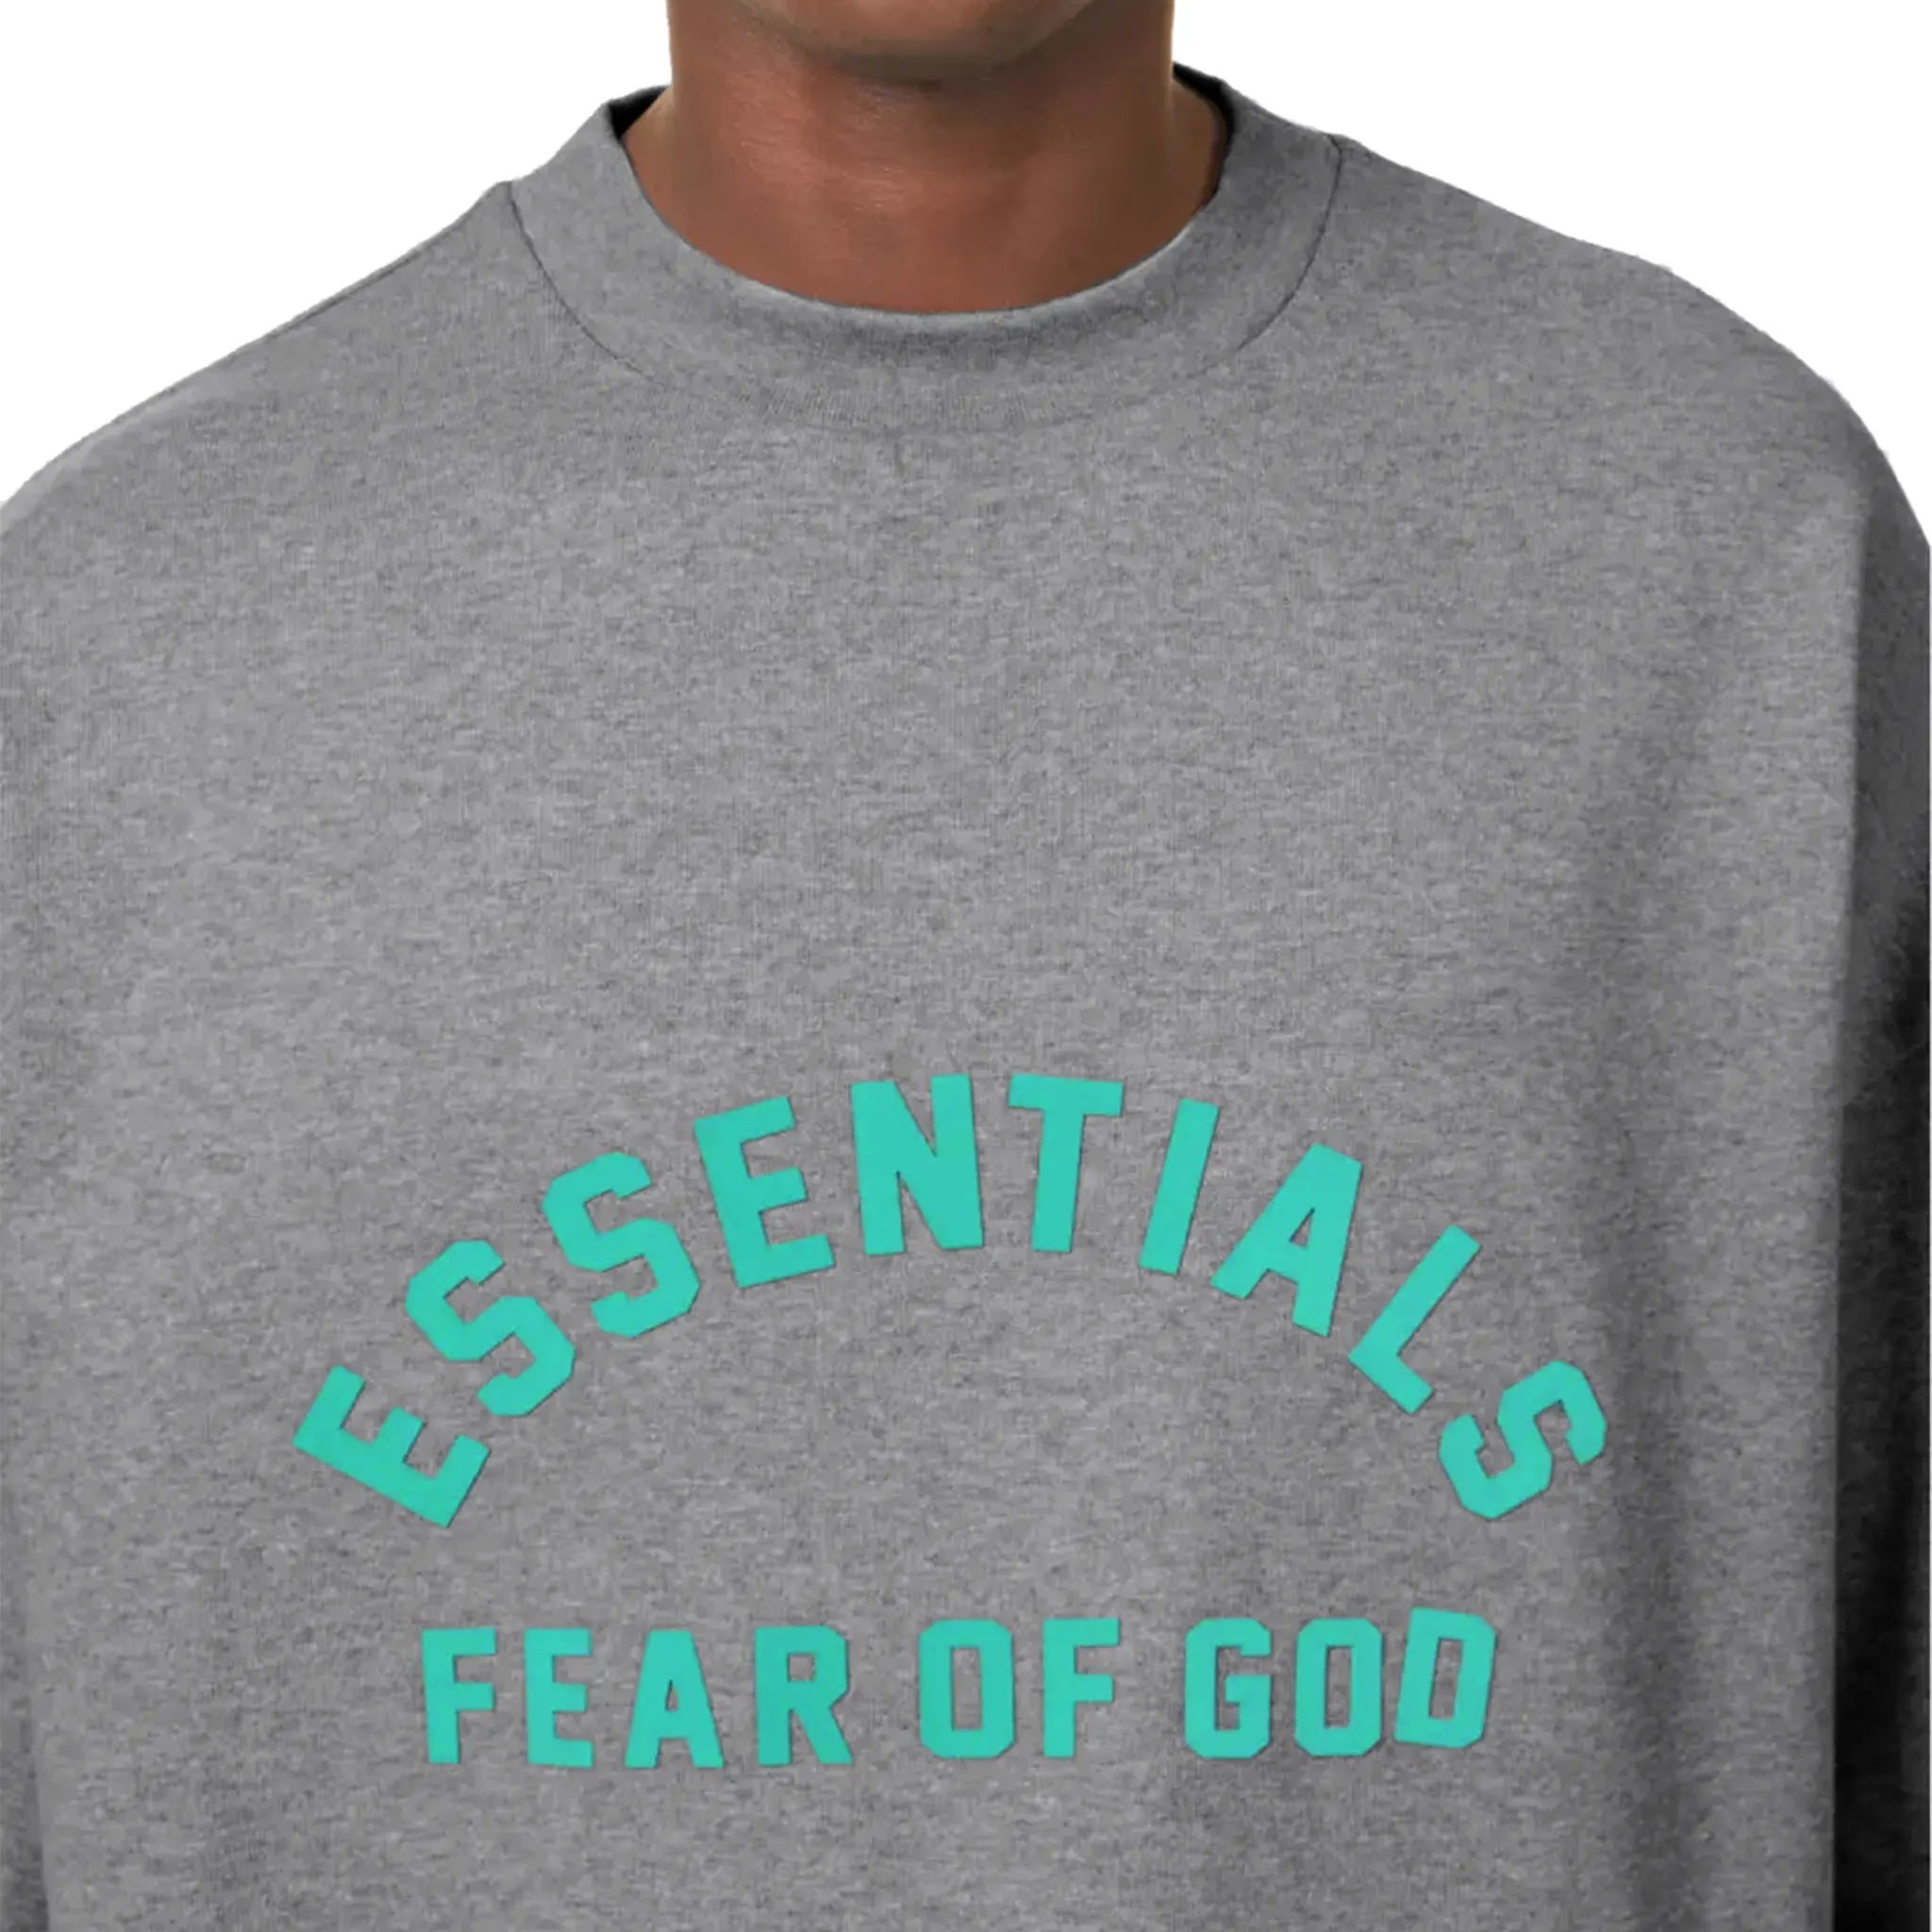 Detail view of Fear Of God Essentials Heavy Jersey S/S Dark Heather Oatmeal T Shirt